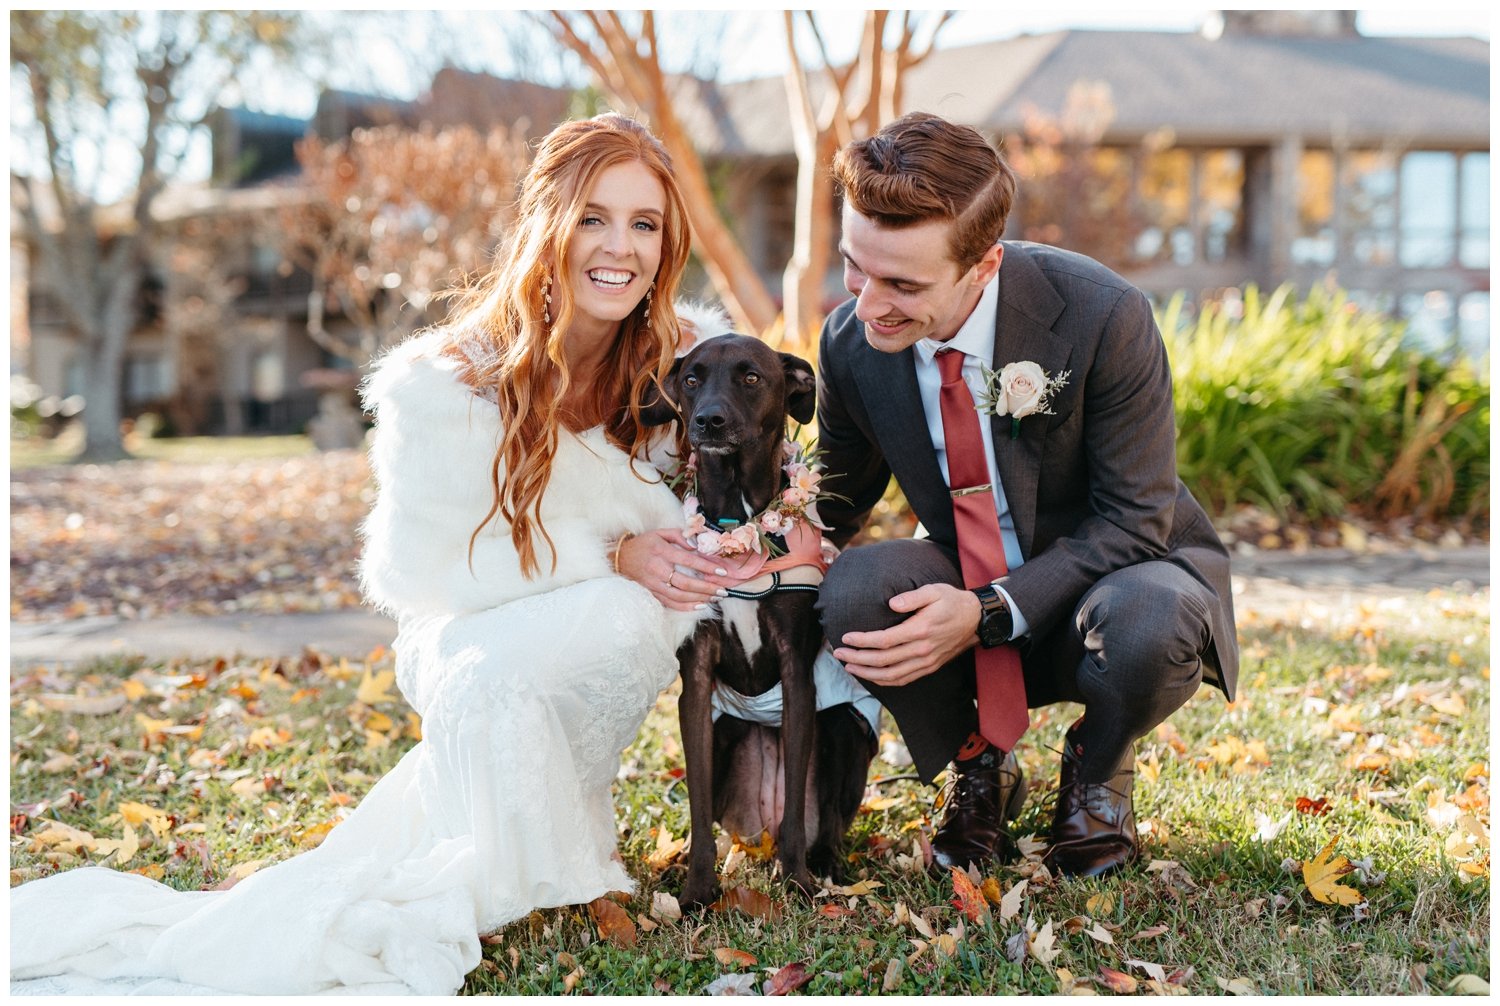 The couple poses with their dog at the mountain wedding venue